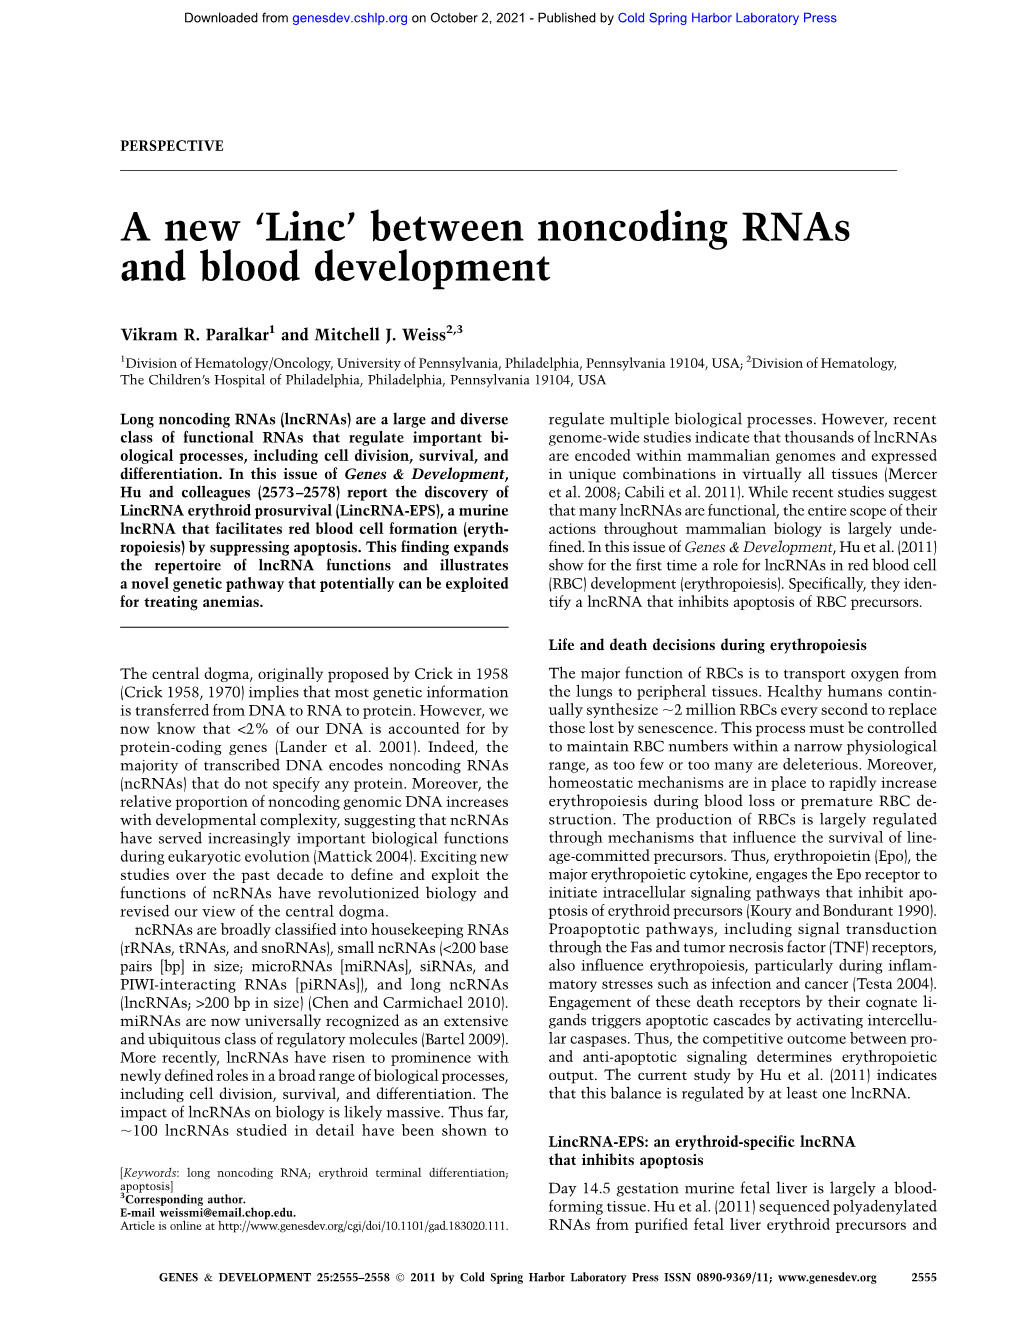 A New 'Linc' Between Noncoding Rnas and Blood Development